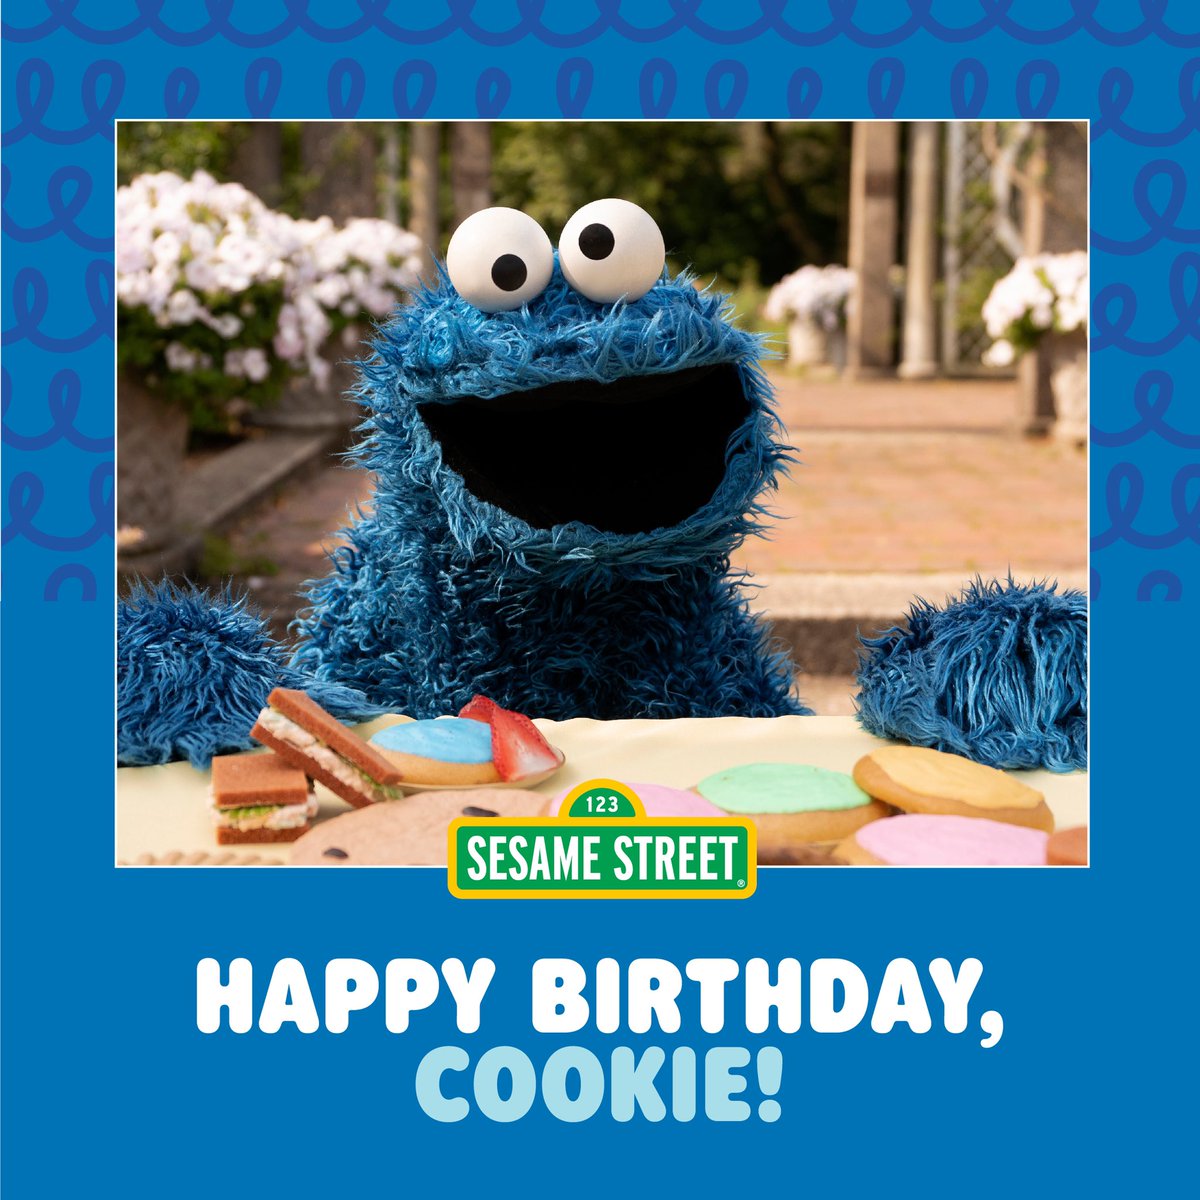 Whenever we need a good laugh, a big hug, or a warm cookie, we always know who we can depend on. Happy birthday to the furry friend we love so much, @MeCookieMonster! 🍪 #HBDCookieMonster